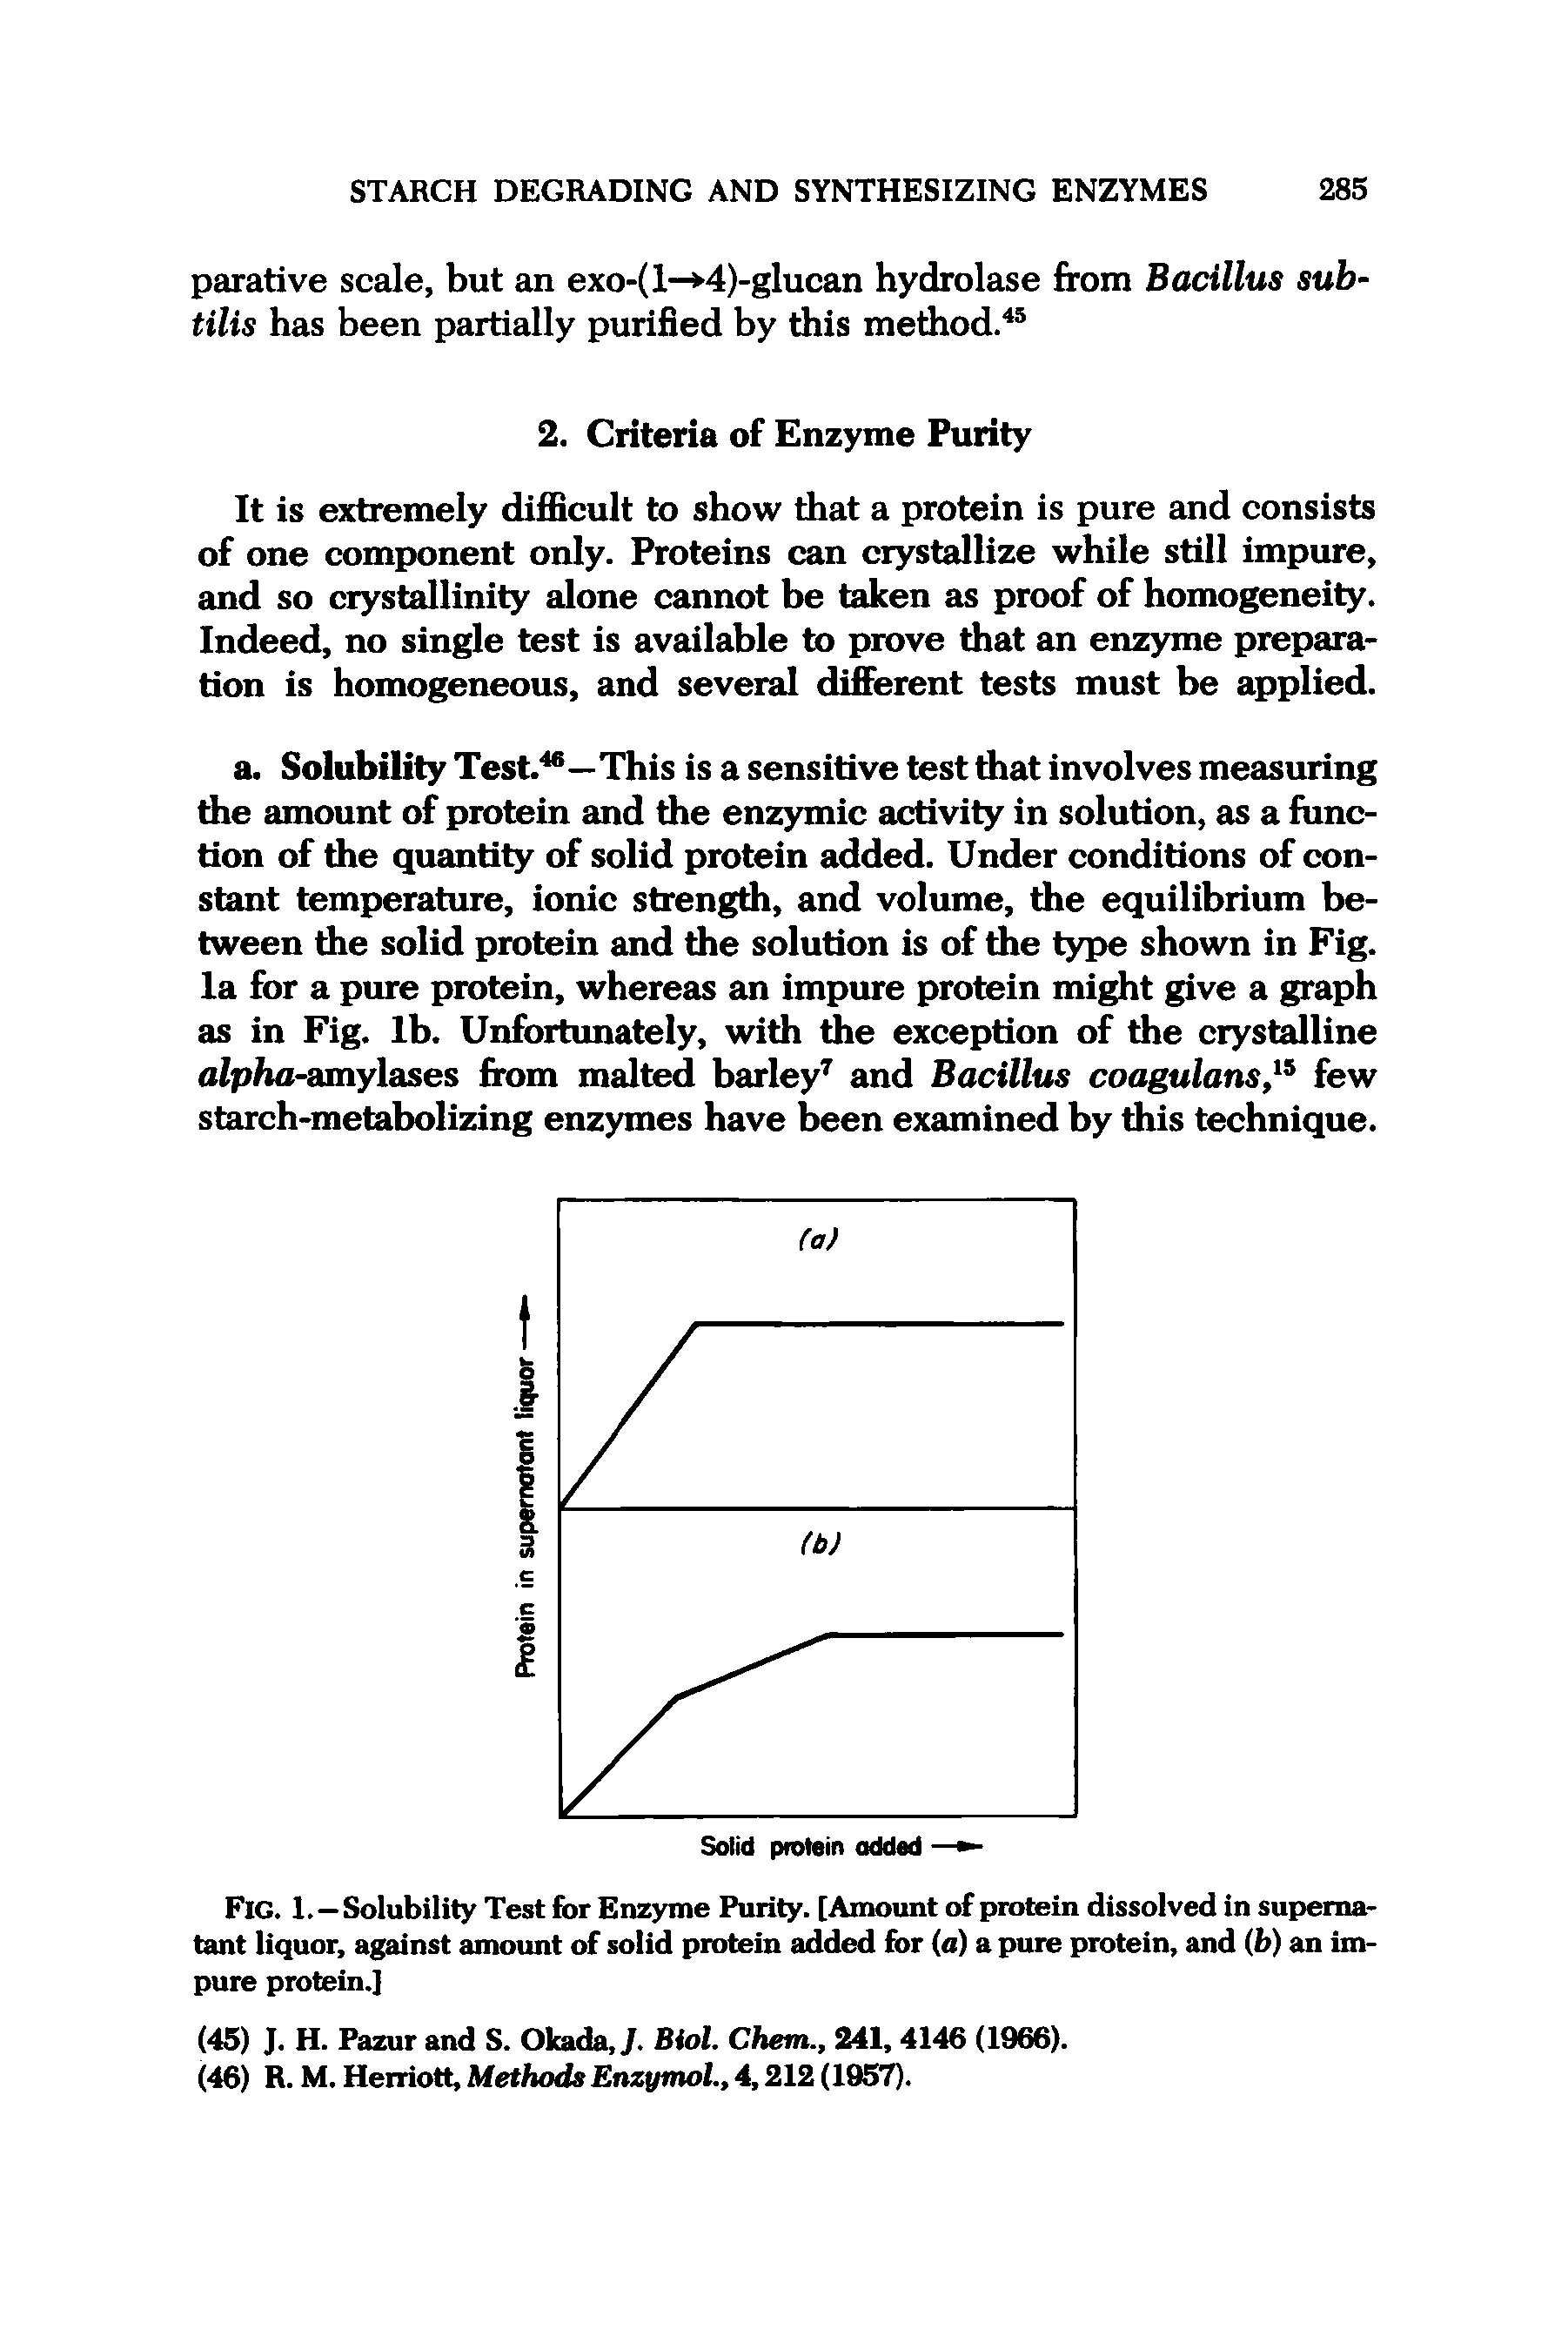 Fig. 1.—Solubility Test for Enzyme Purity. [Amount of protein dissolved in supernatant liquor, against amoimt of solid protein added for (a) a pure protein, and (b) an impure protein.]...